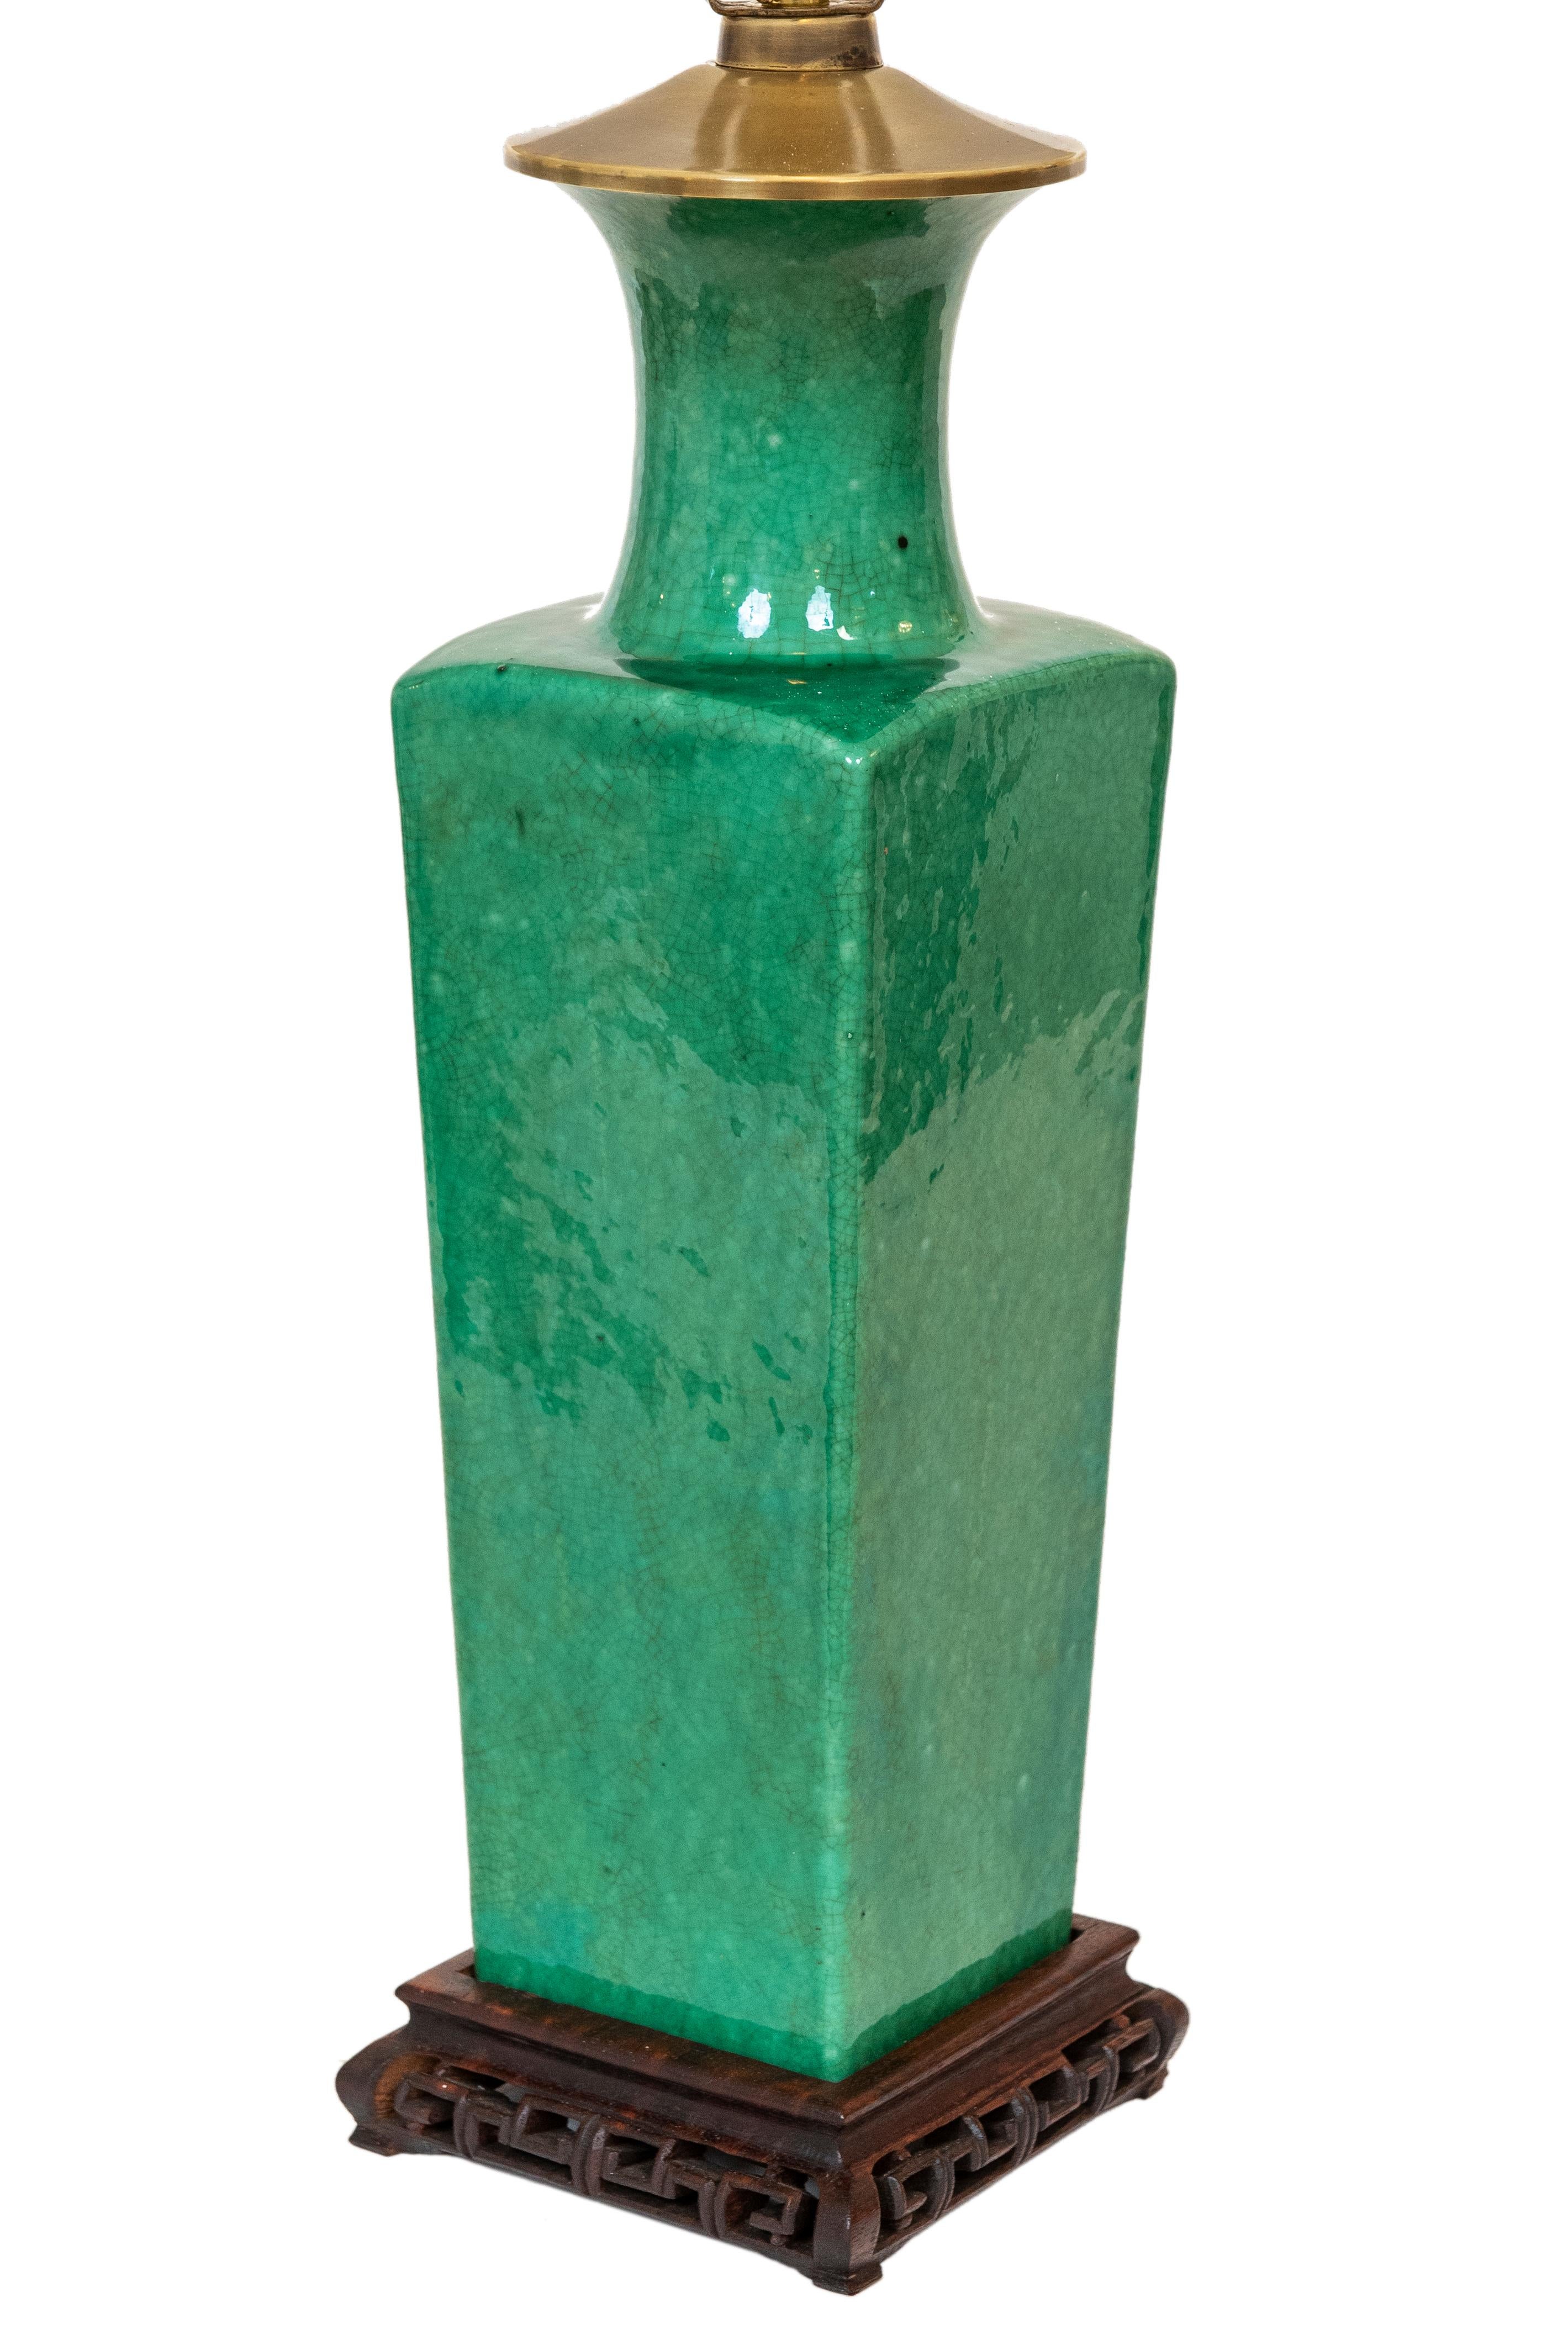 This vibrant and stunning apple/mint green urn shaped lamp has a beautiful crackle glazed finish and is mounted on a carved wood decorative base. The lamp has been cleaned and rewired with new socket and cord. It is fitted with a white linen style